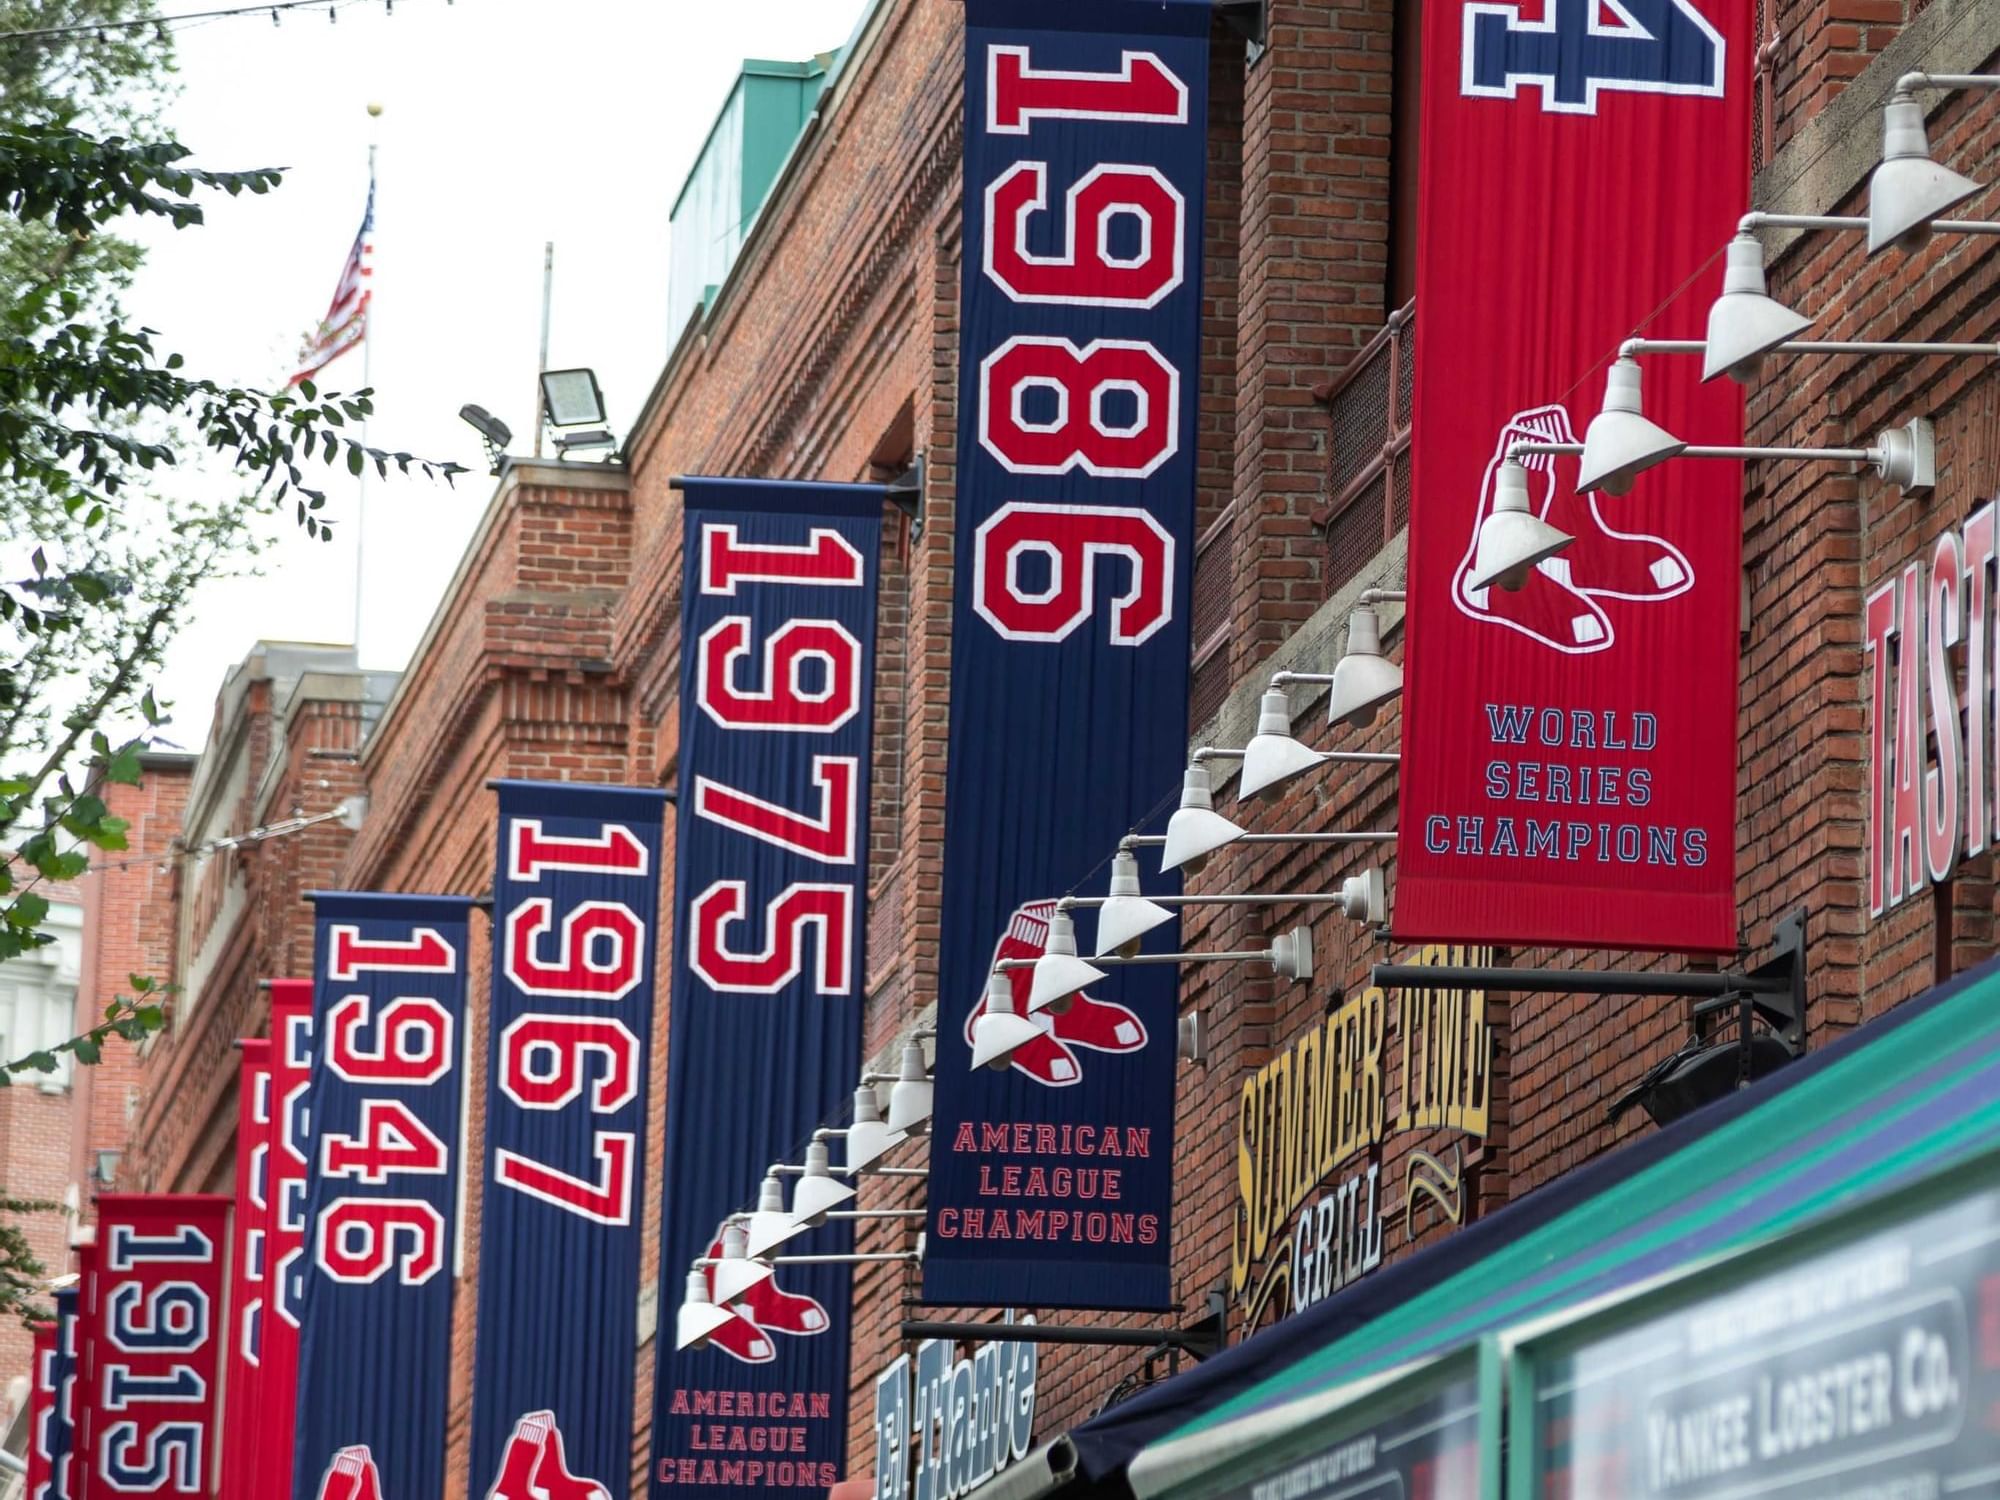 Banners at Fenway Park